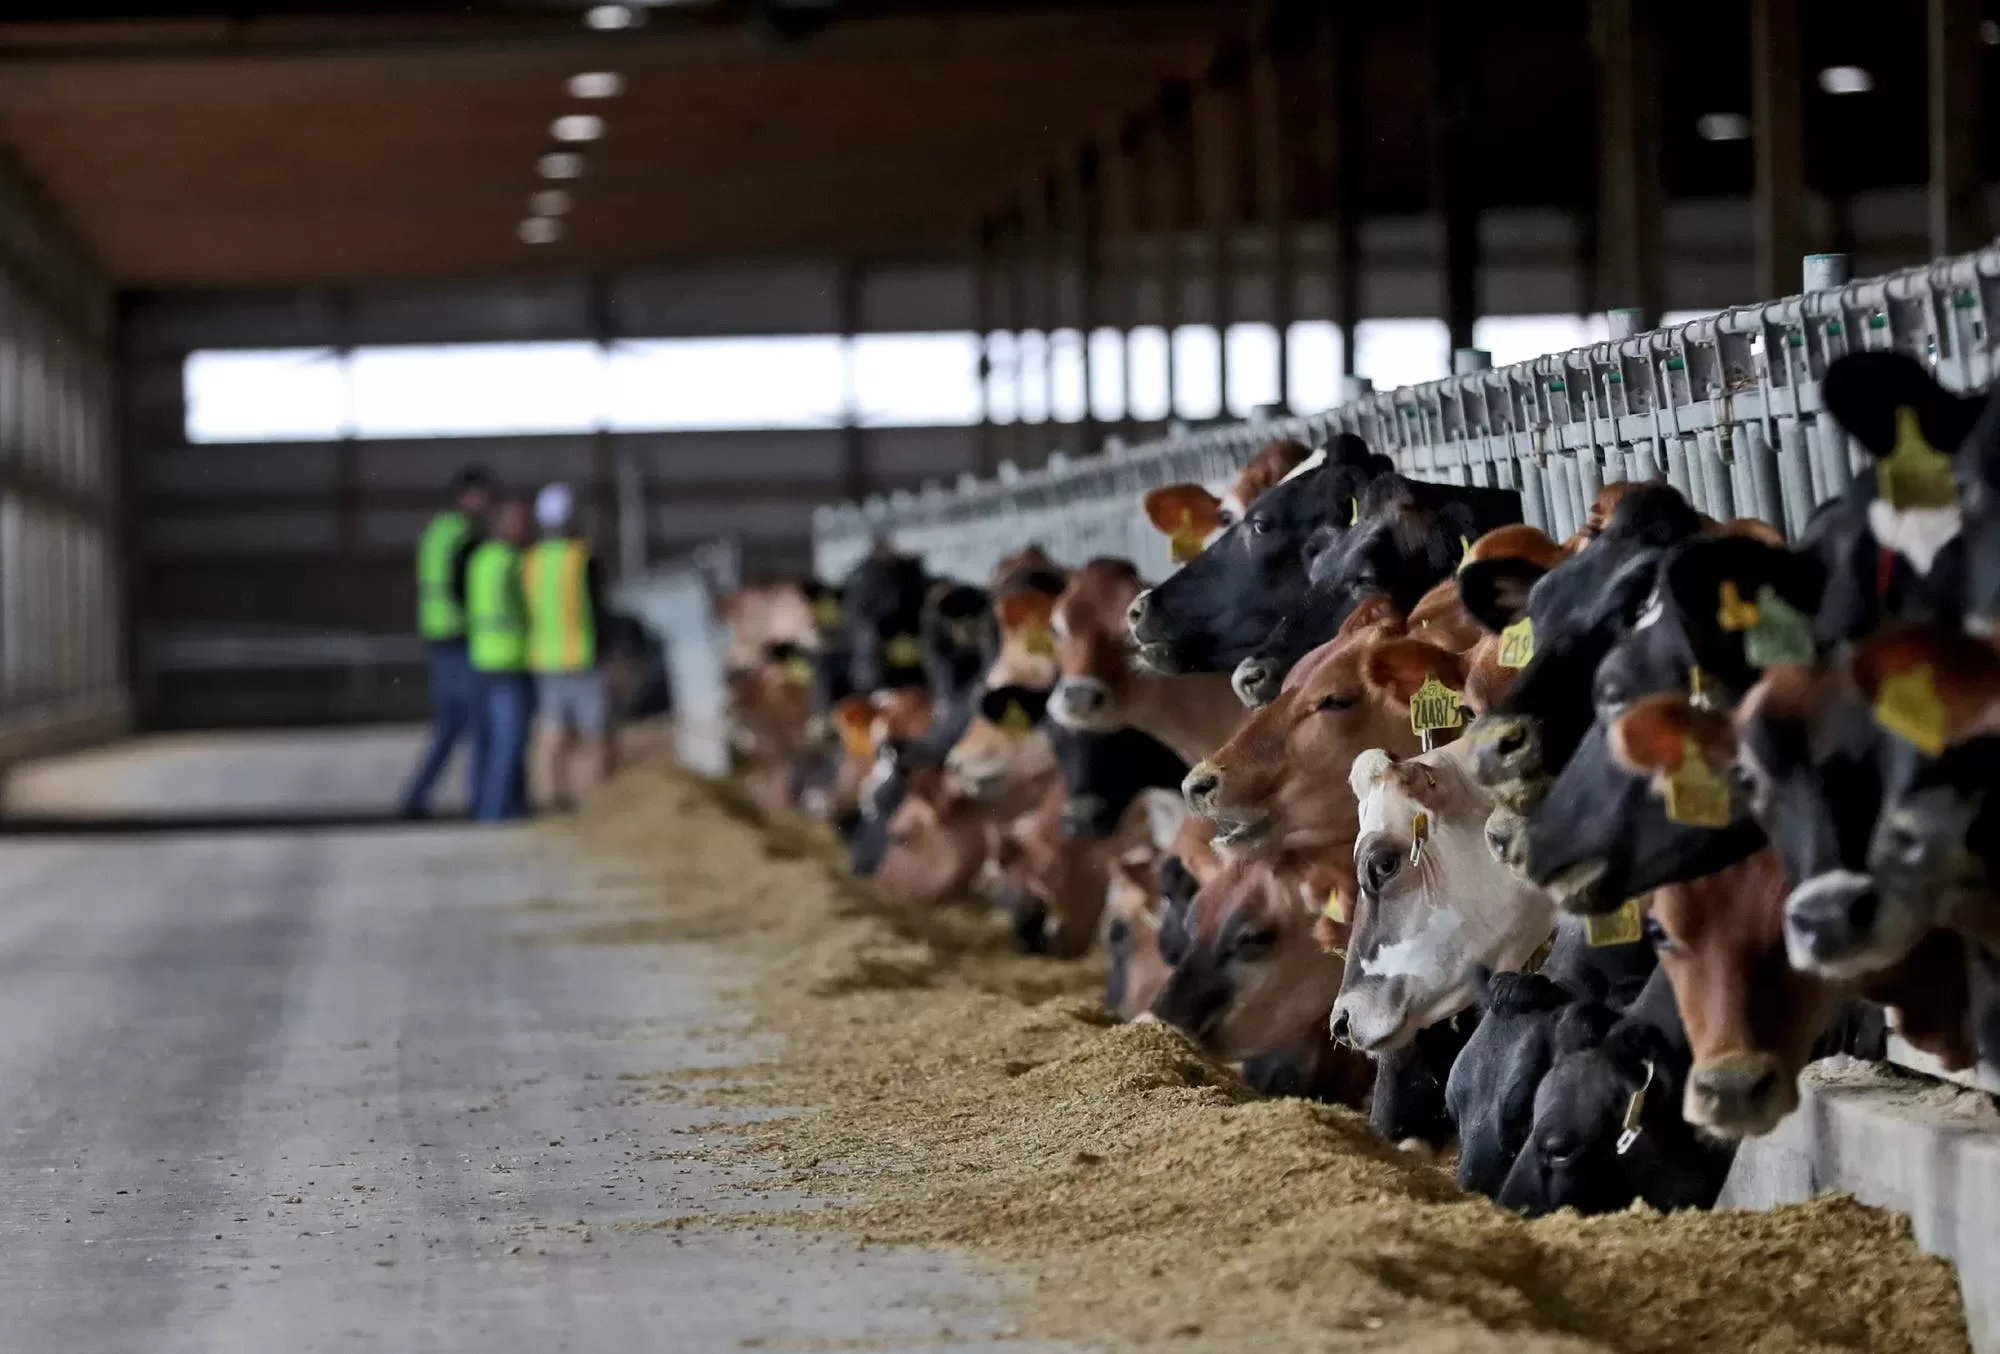 sustainability in the dairy industry is a complex problem